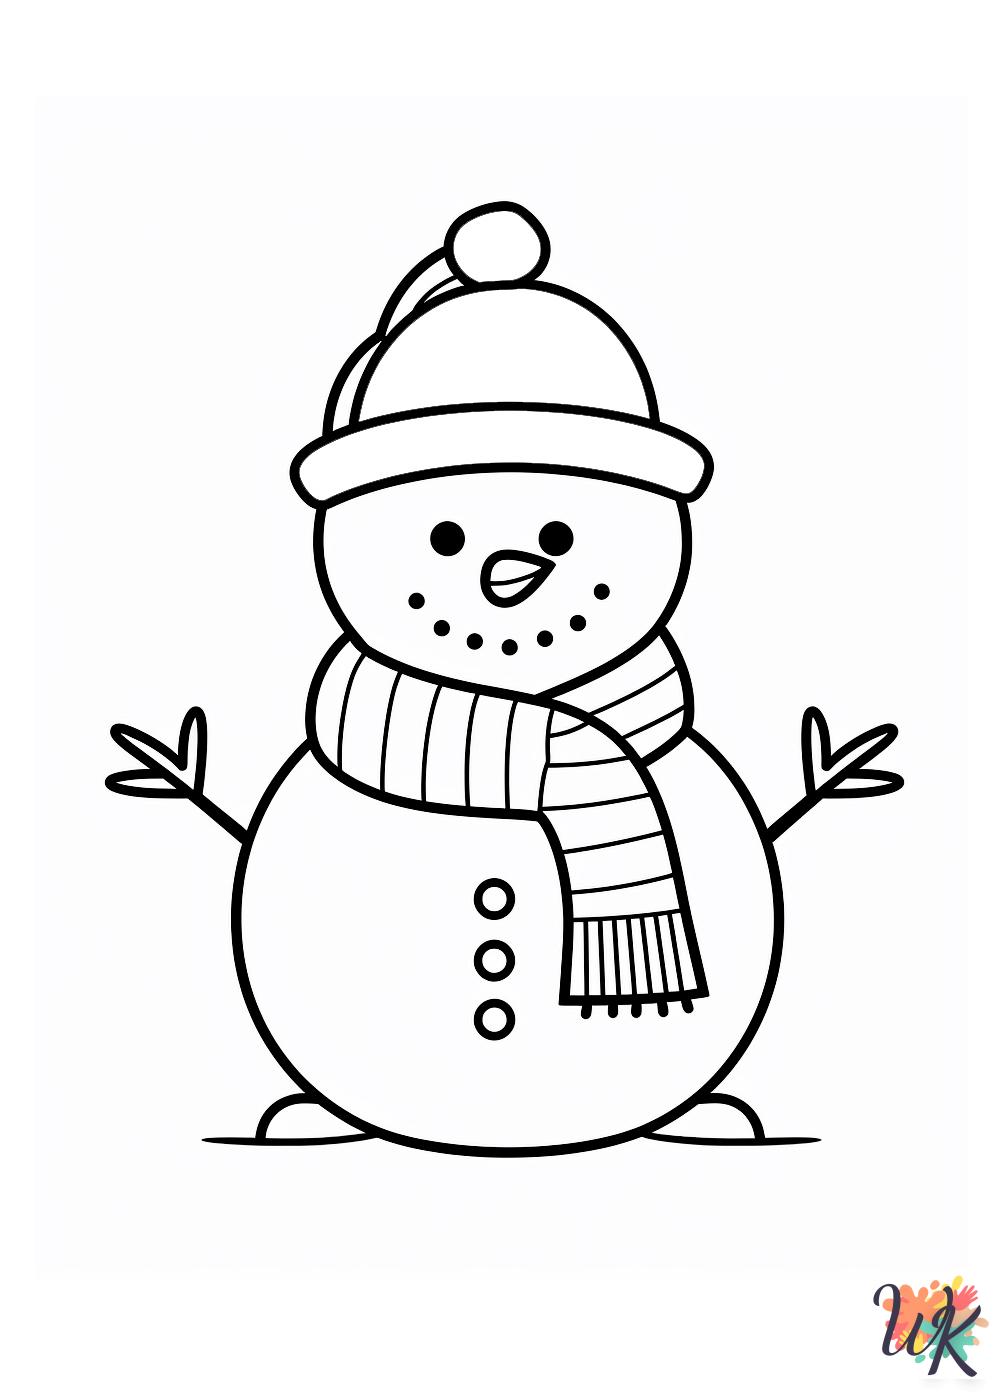 Snowman printable coloring pages